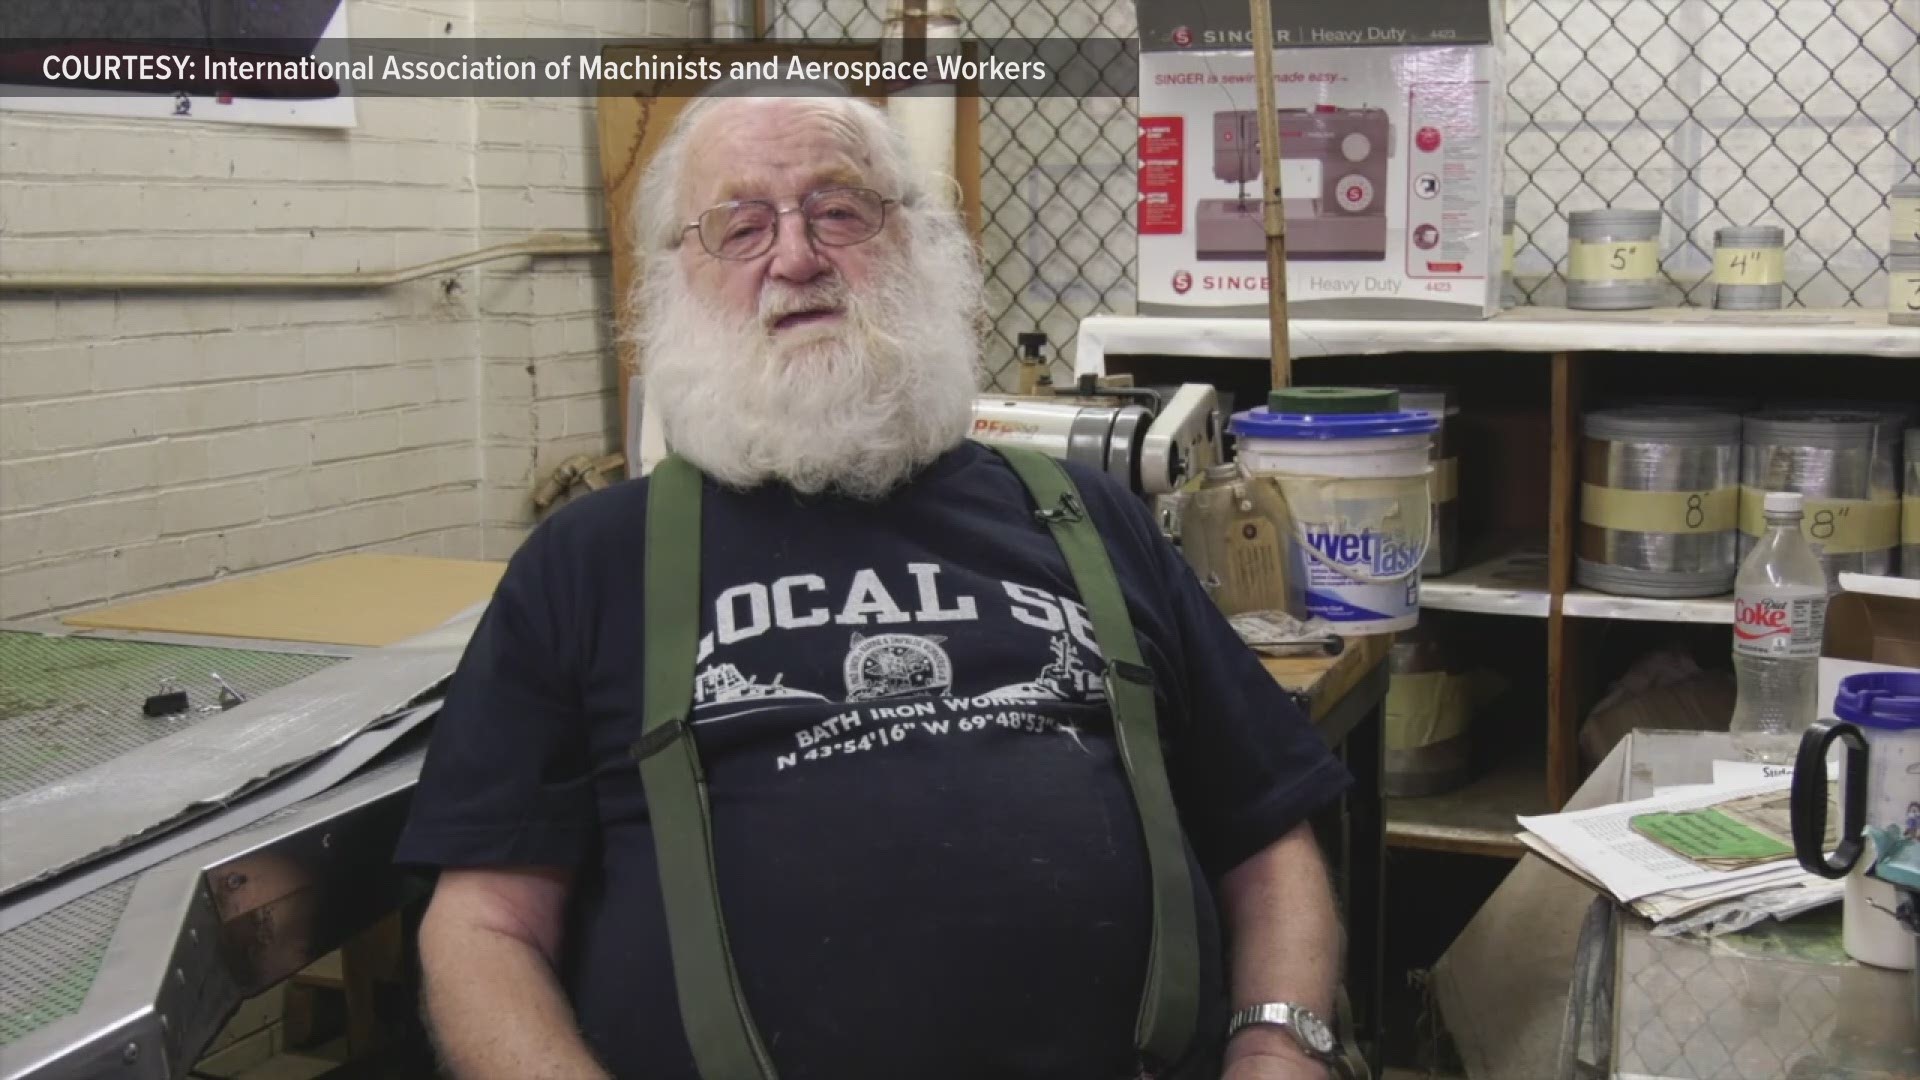 At 86 years old, Clayton Grover looks back on his 67 years spent at Bath Iron Works.